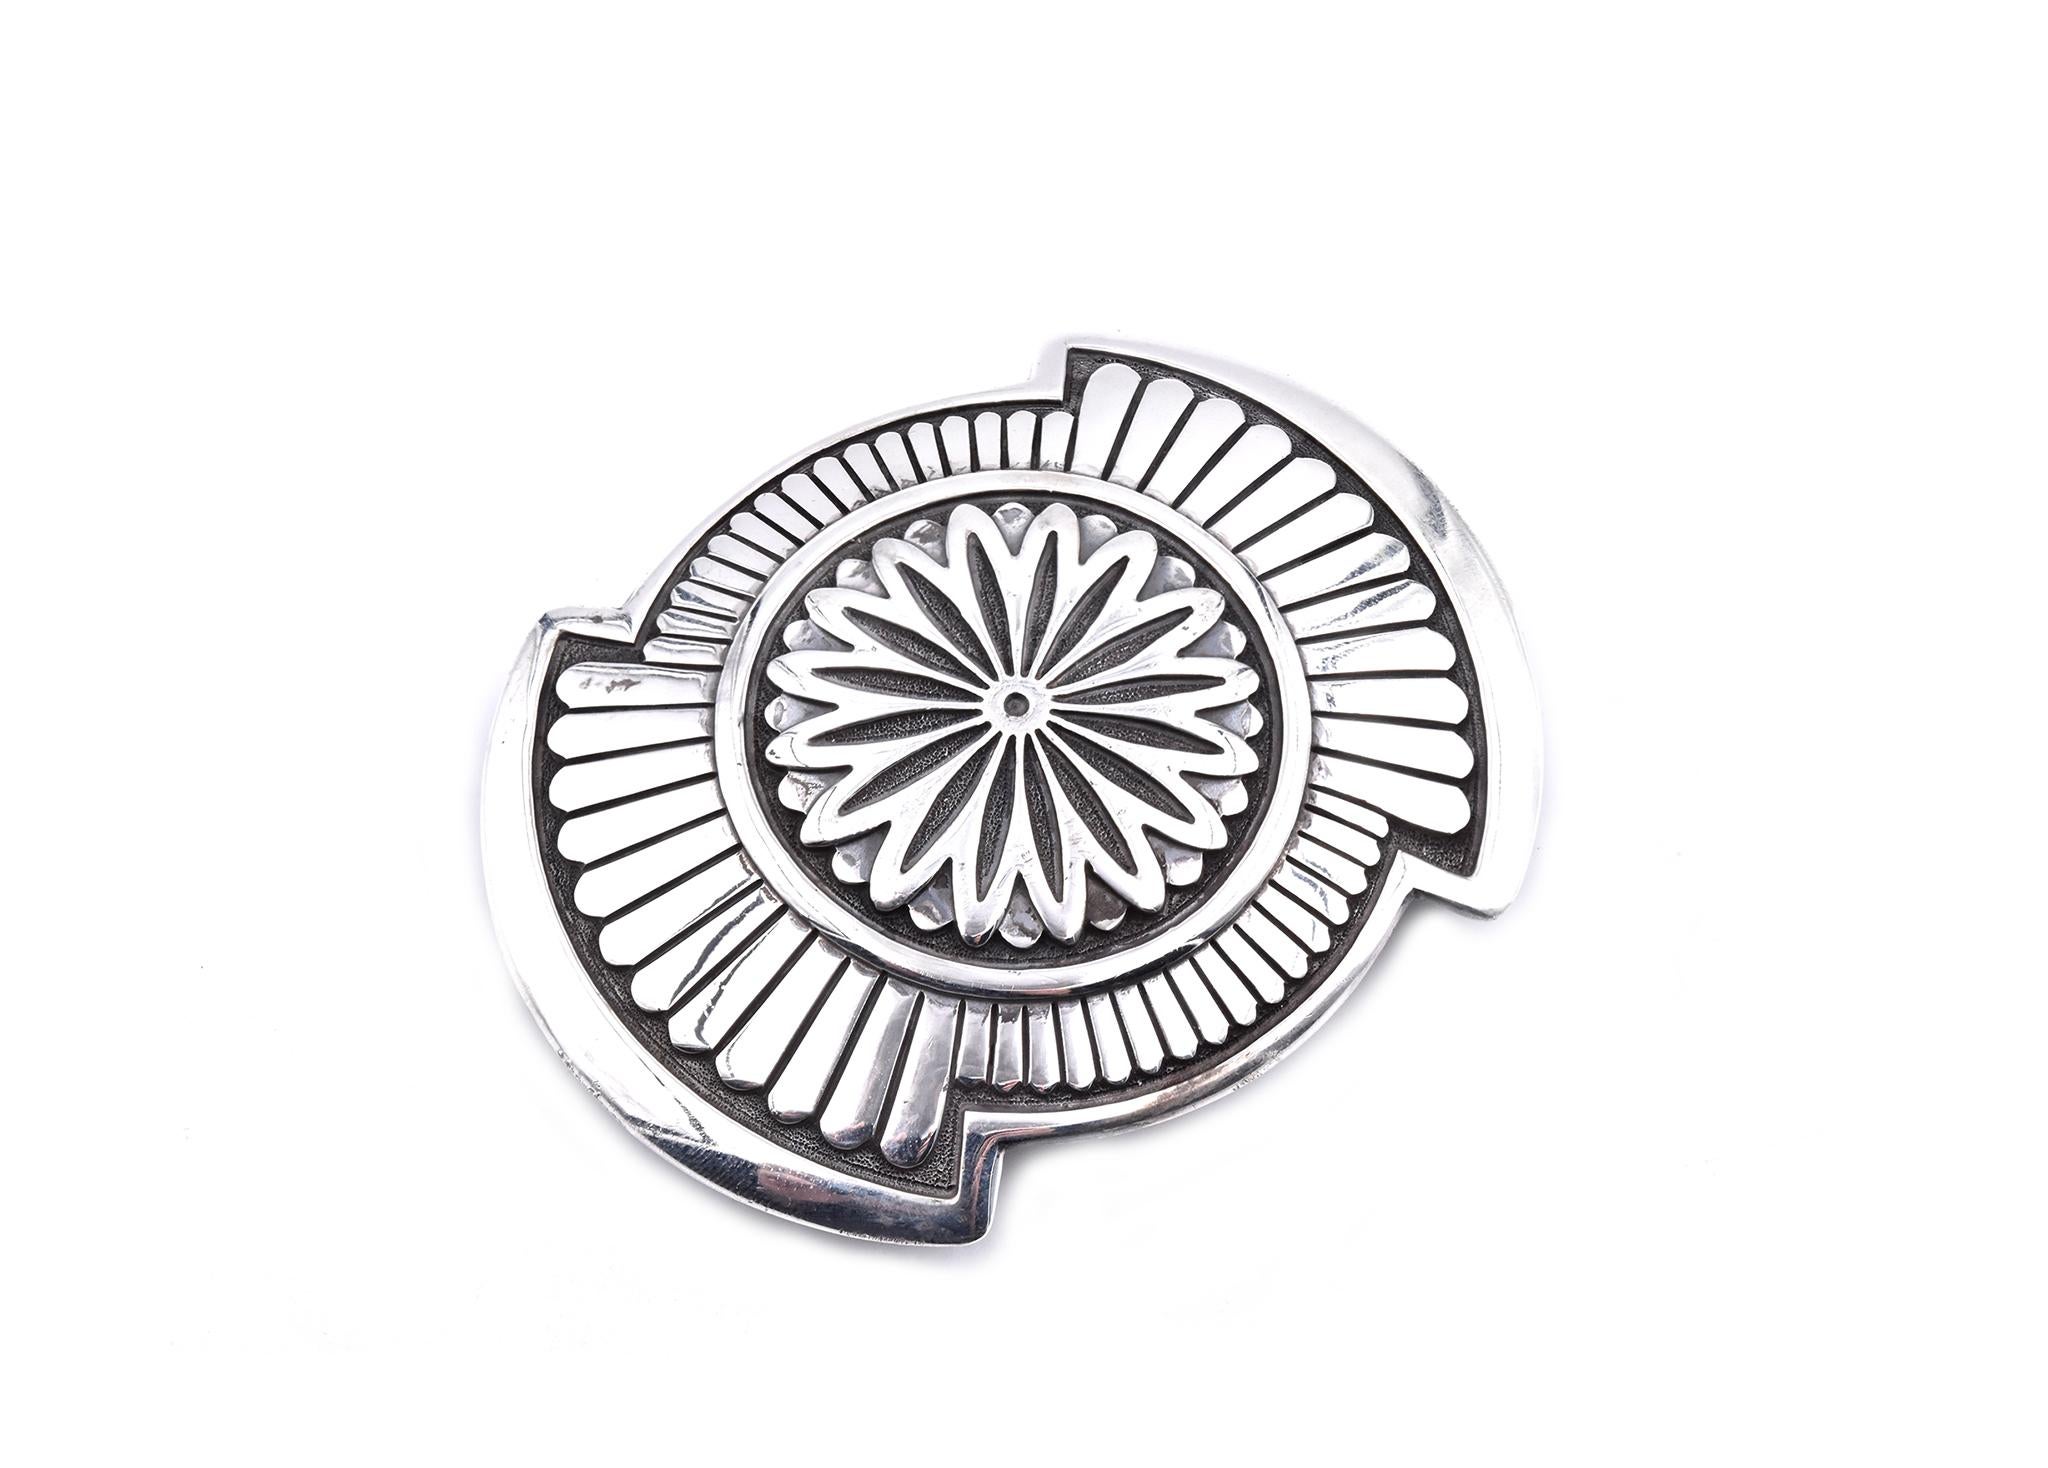 Designer: W. Doran
Material: sterling silver
Dimensions: buckle measures 72.7 X 53.5mm 
Weight: 64.12 grams
